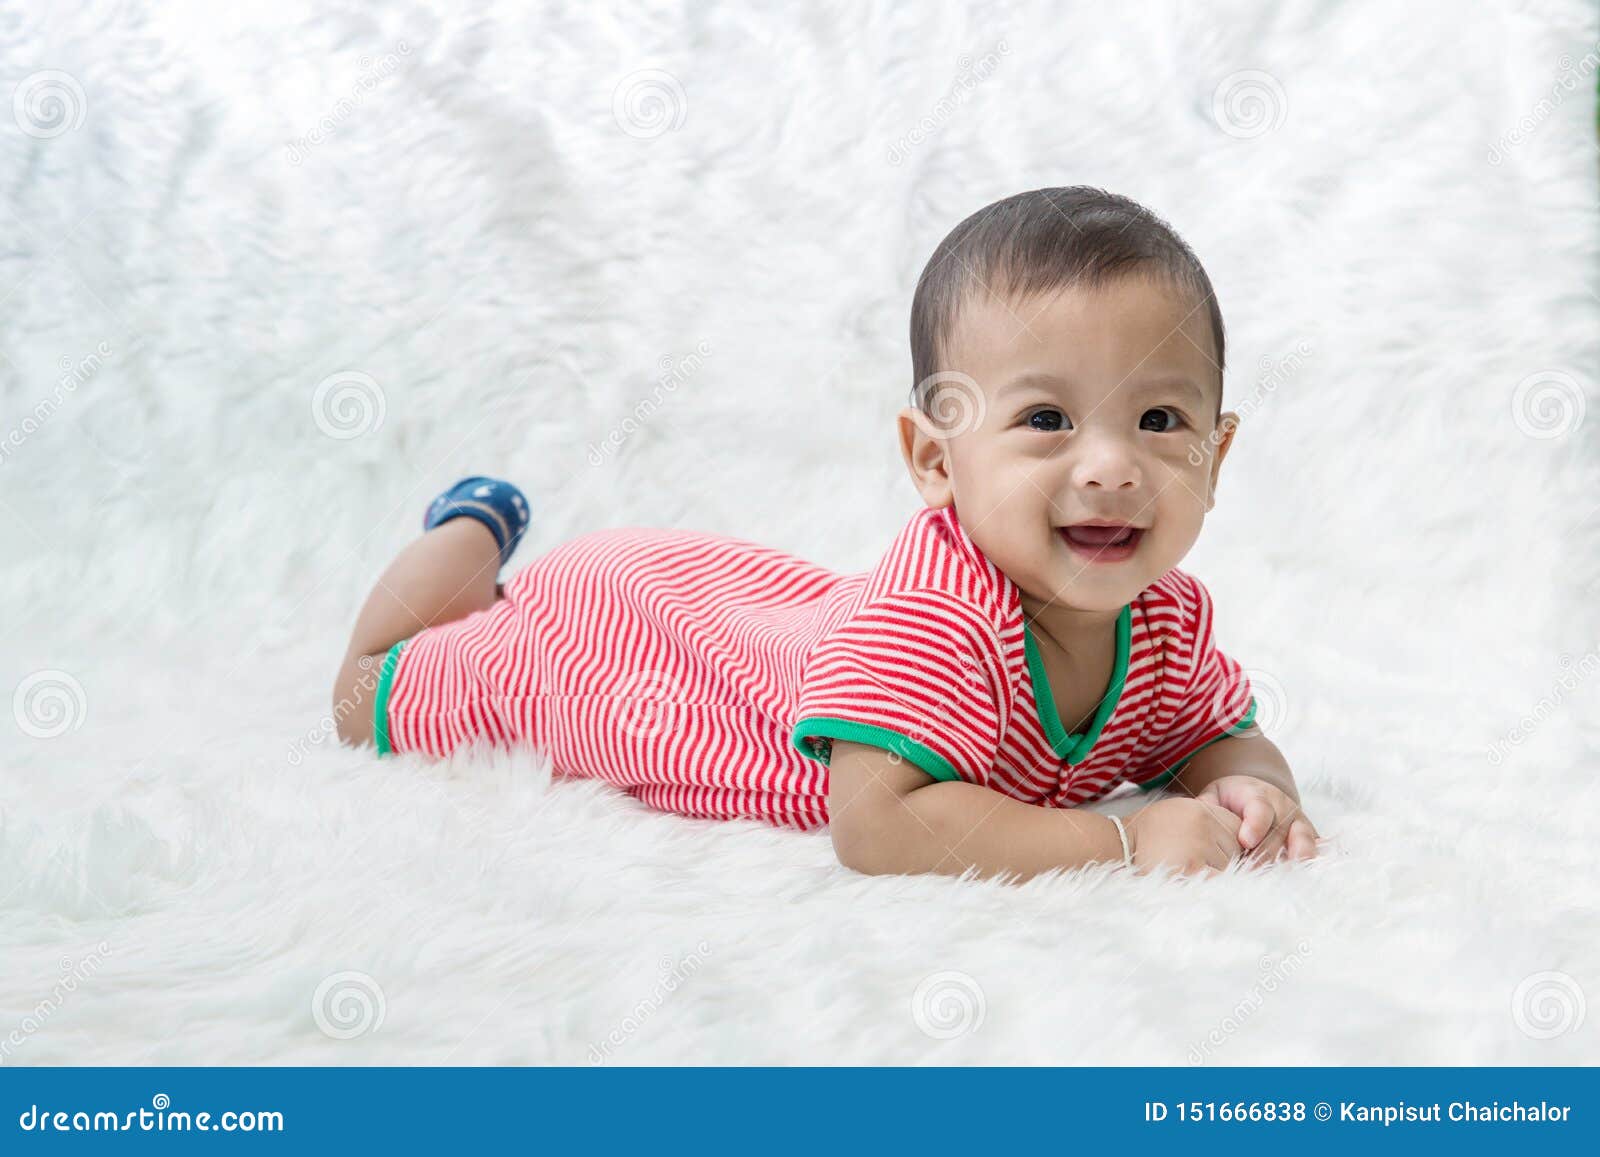 Smile Baby Boy is Shooting in the Studio. Fashion Image of Baby ...